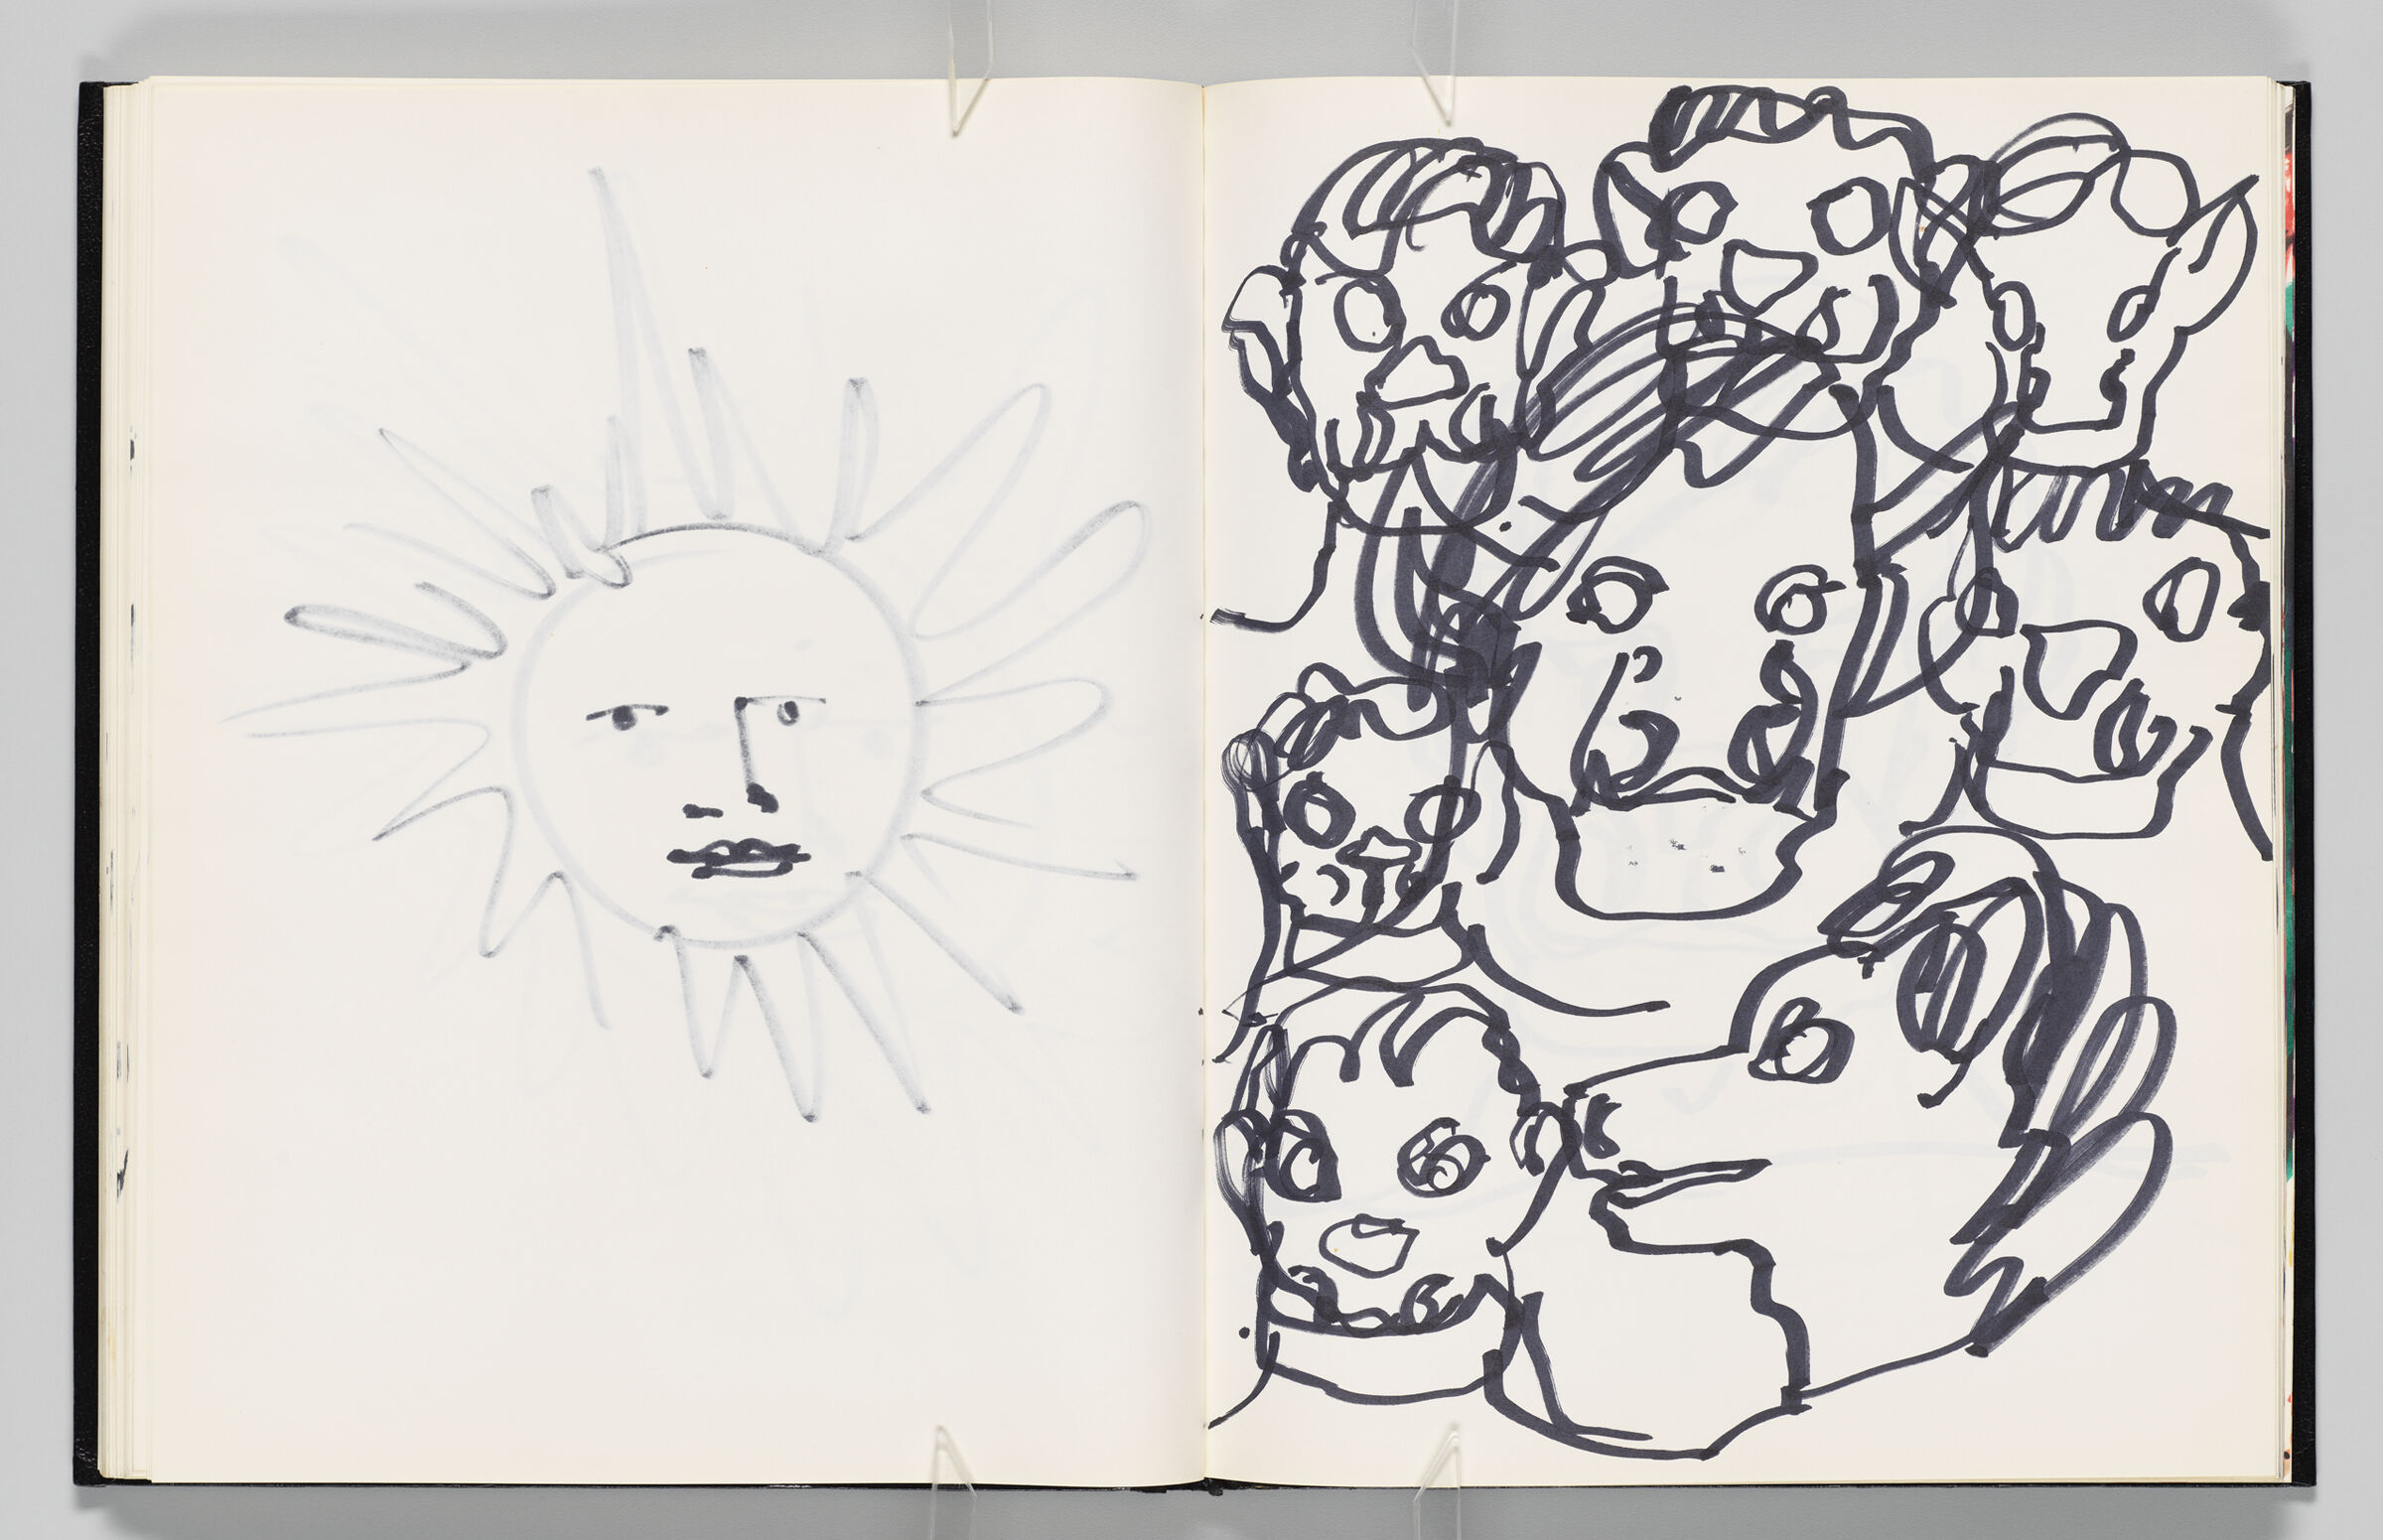 Untitled (Bleed-Through Of Previous Page, Left Page); Untitled (Dog-Faced Men, Right Page)